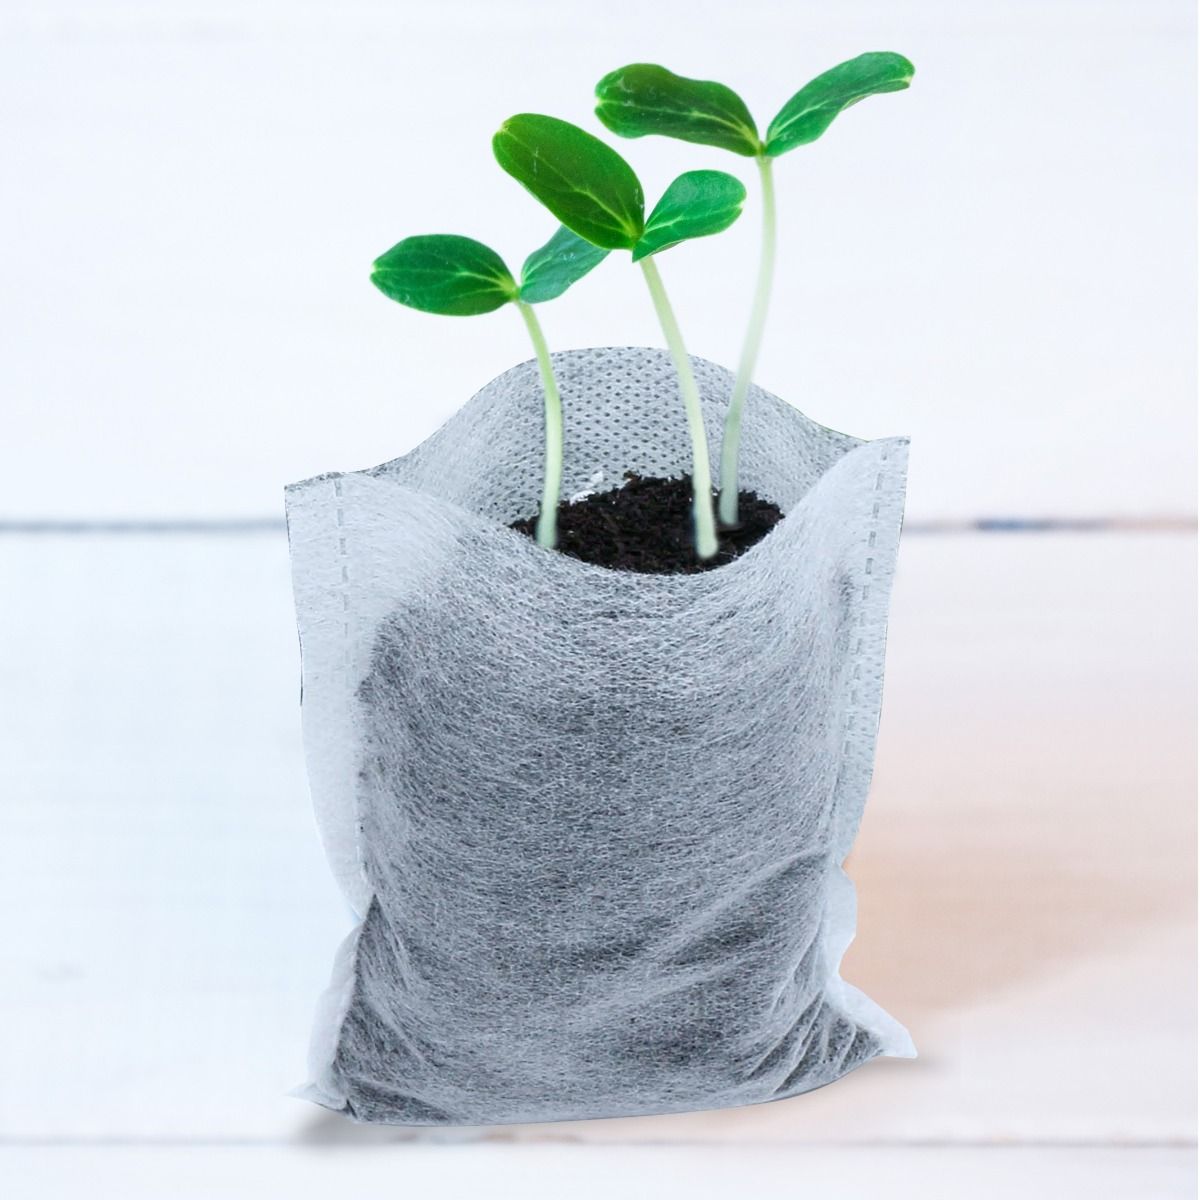 jowneel Planting bags 200Pcs Biodegradable Non-woven Nursery Bags Plant Grow Bags Fabric Seedling Pots